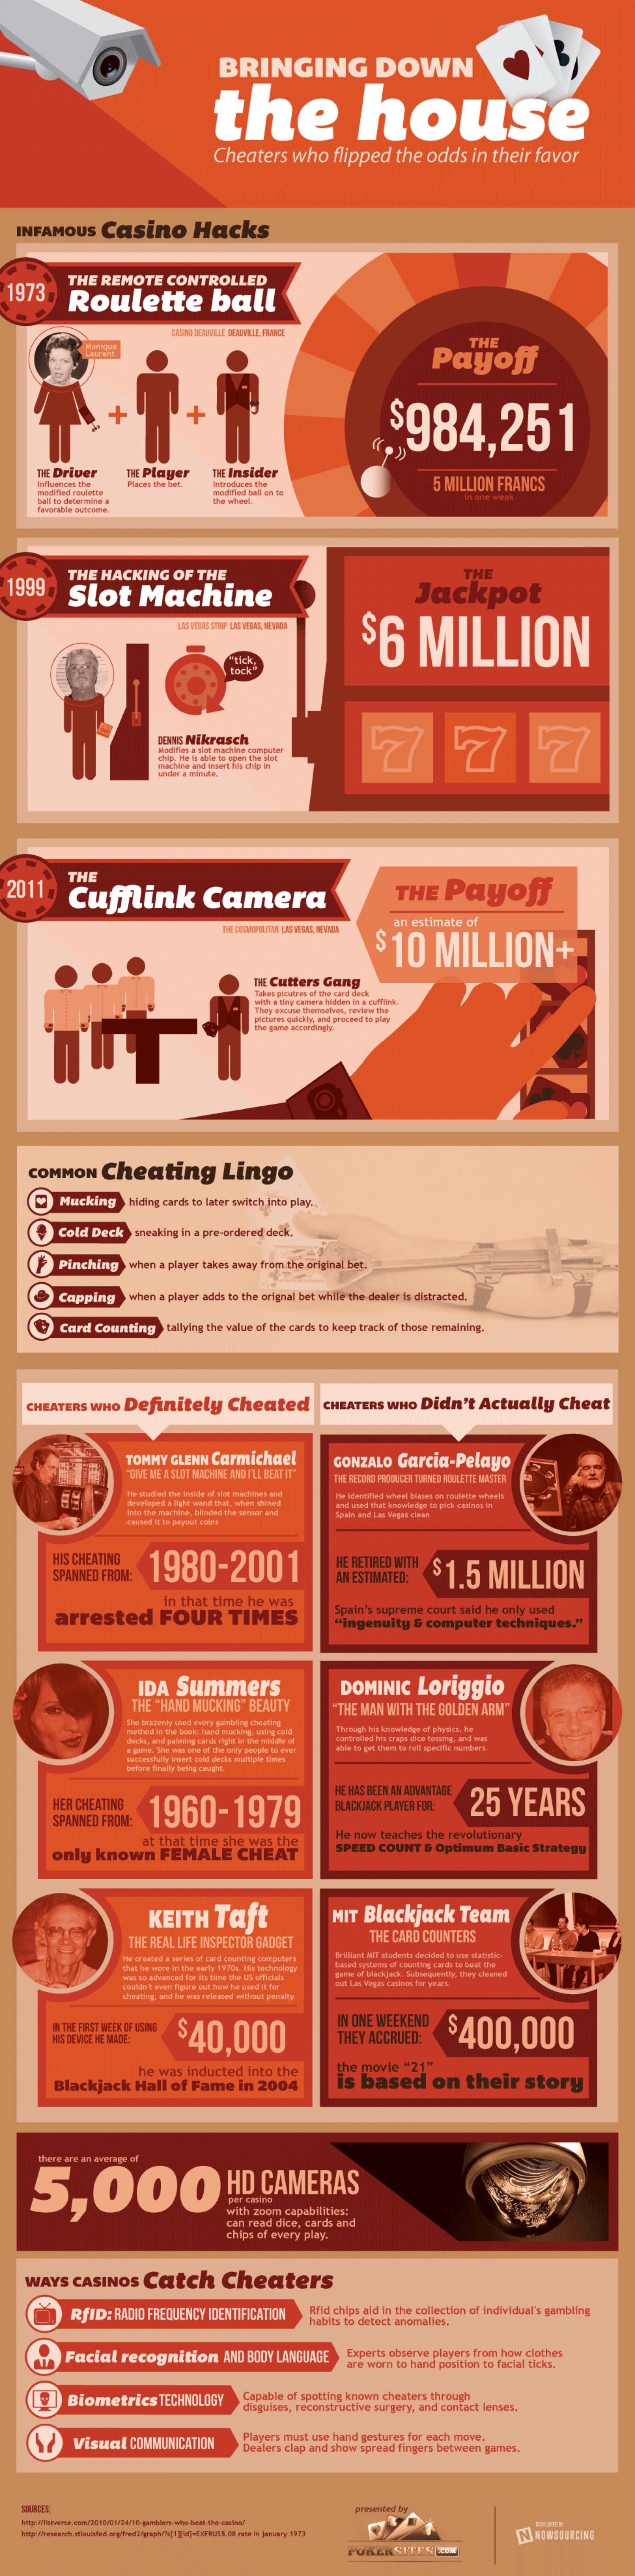 Casino Heroes – Casino Hacks That Brought Down The House [Infographic]